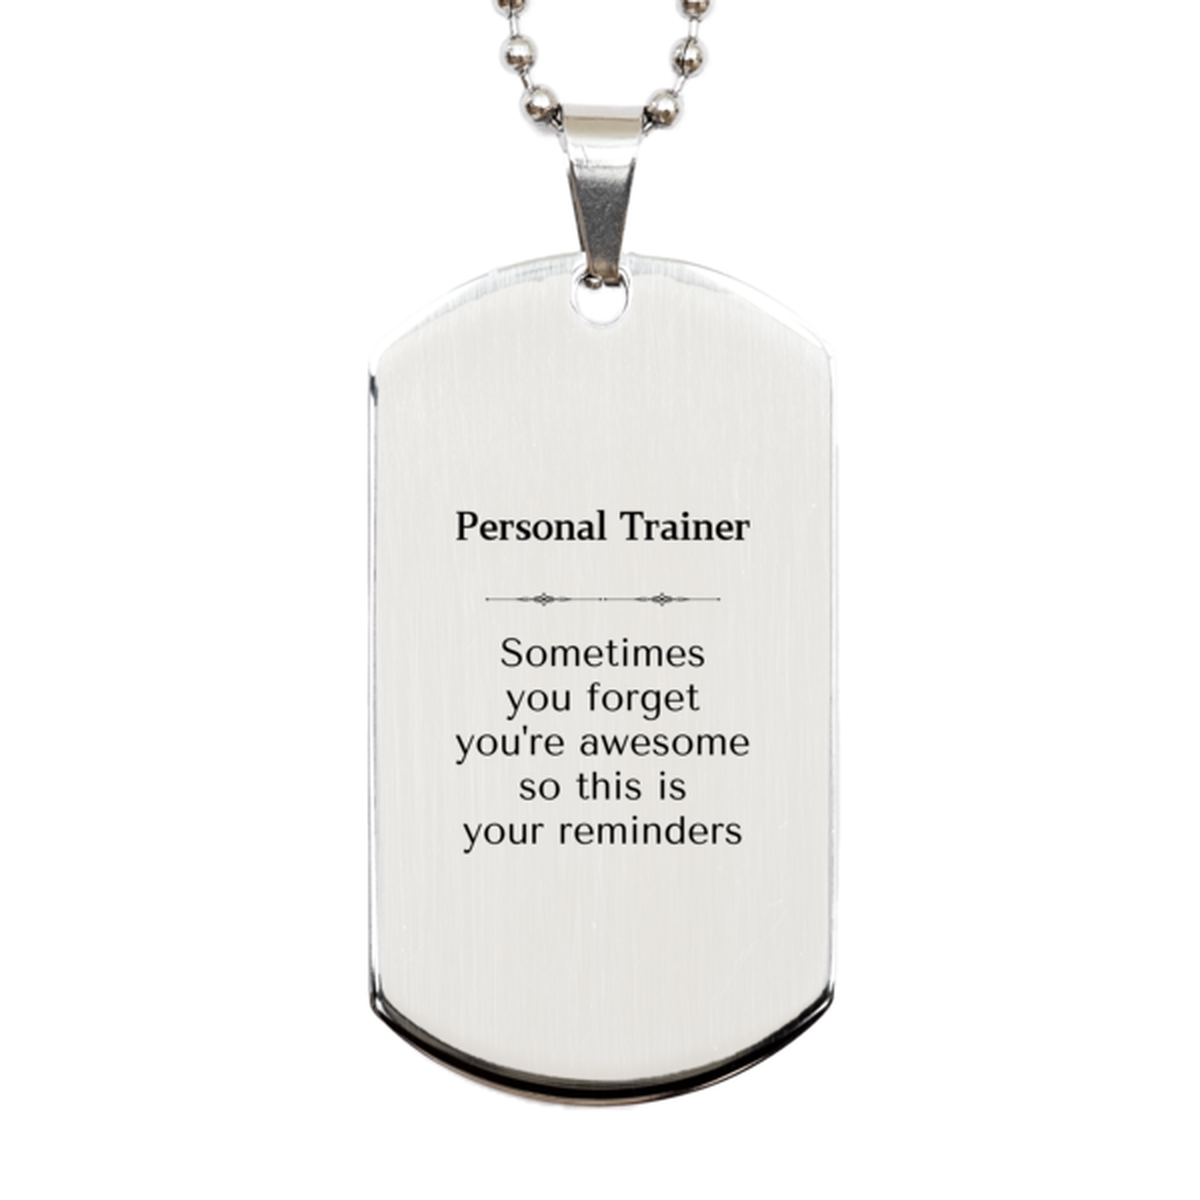 Sentimental Personal Trainer Silver Dog Tag, Personal Trainer Sometimes you forget you're awesome so this is your reminders, Graduation Christmas Birthday Gifts for Personal Trainer, Men, Women, Coworkers